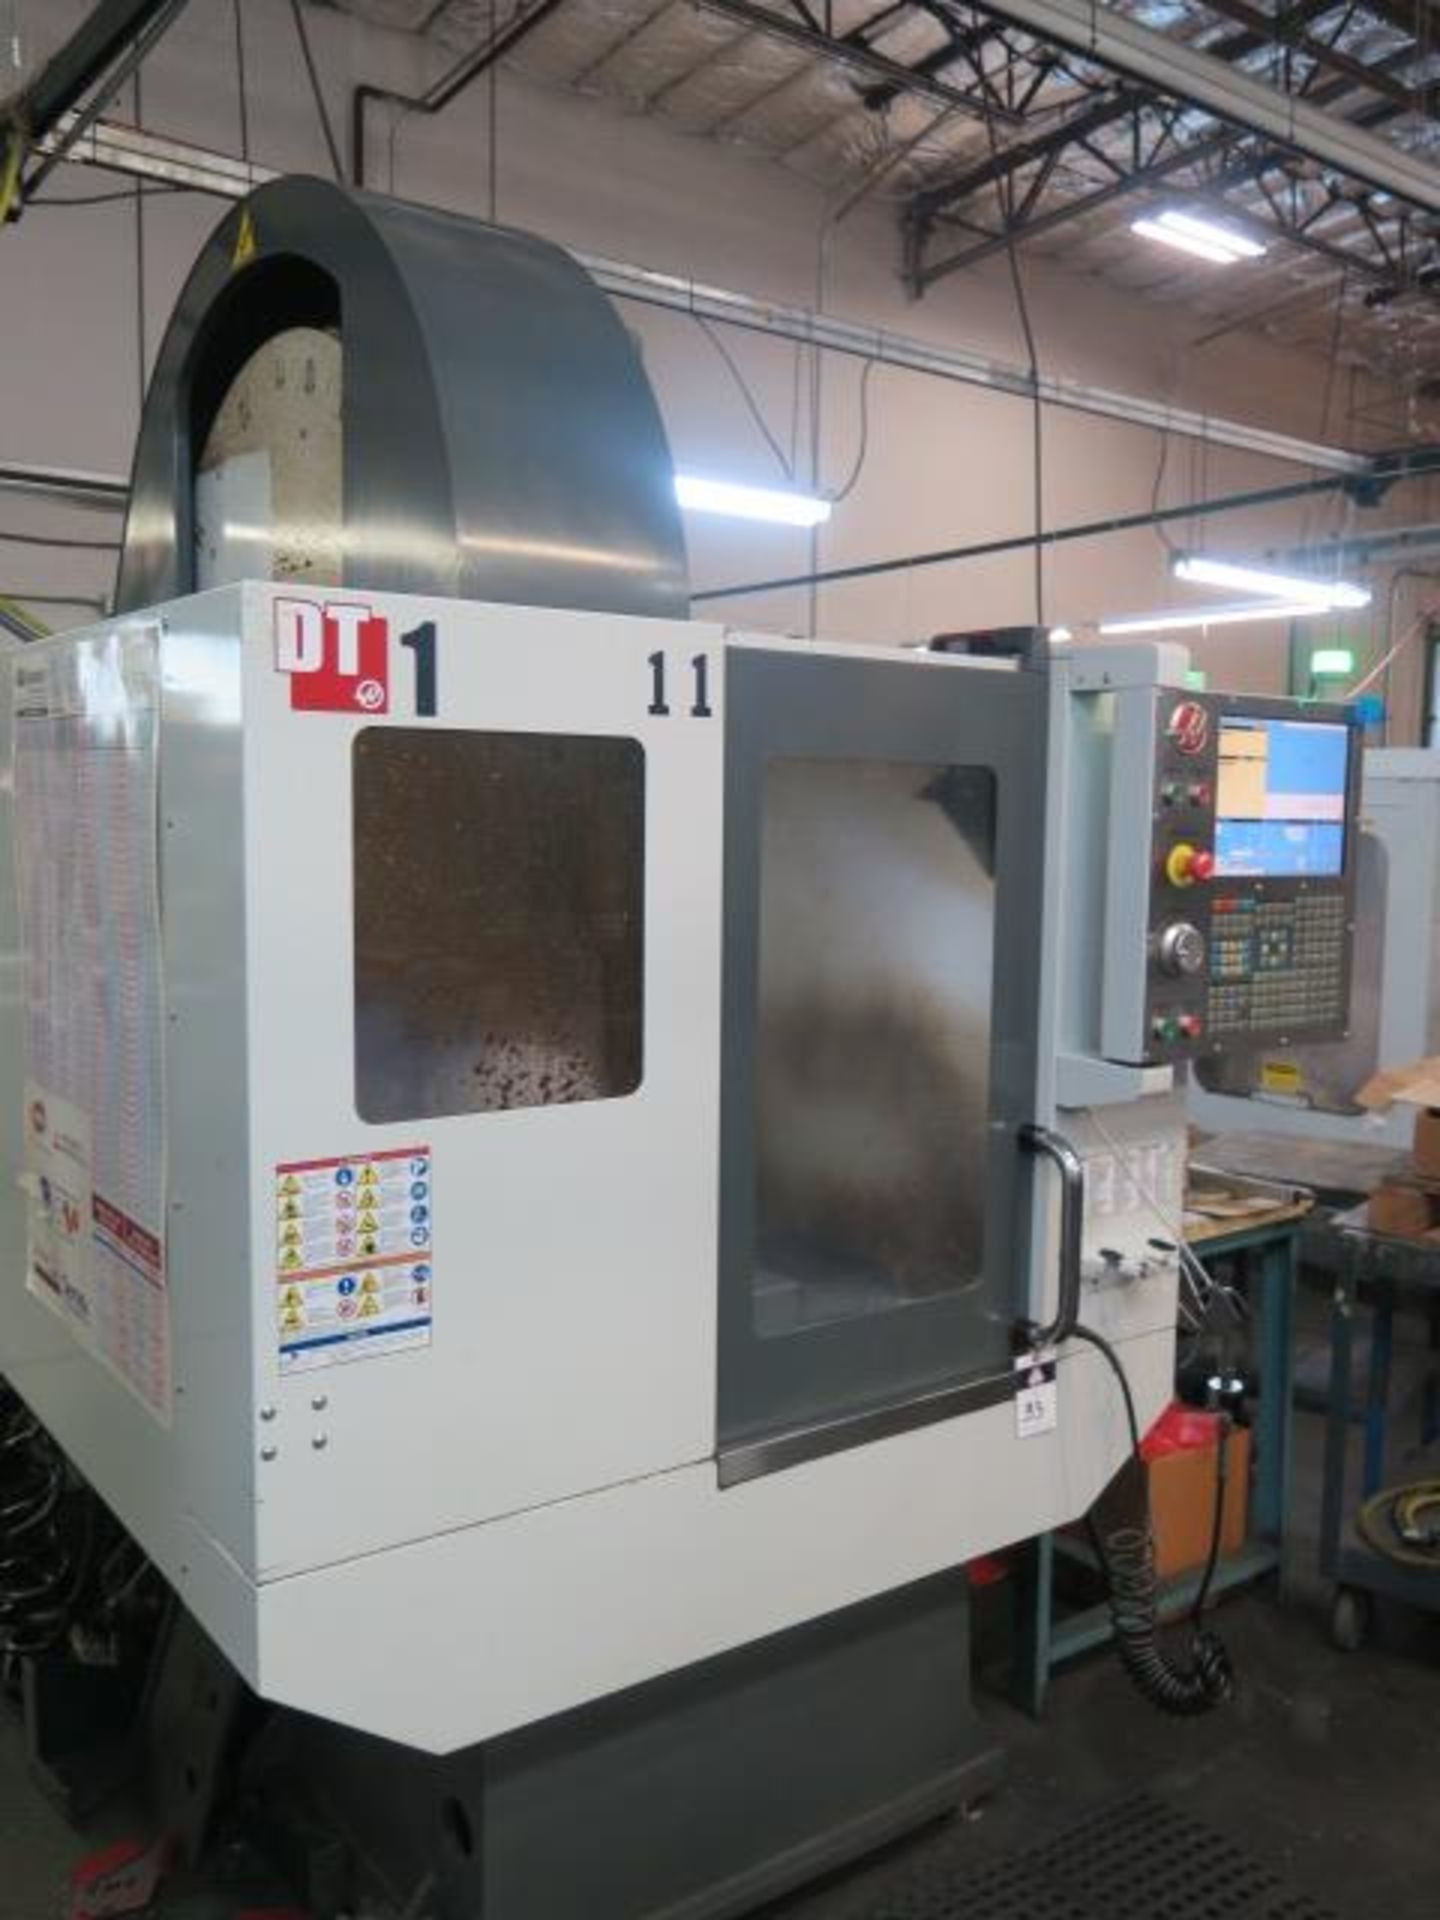 DEC/2014 Haas DT-1 CNC VMC s/n 1118934 w/ Haas Controls, 20-Station ATC, BT-30, SOLD AS IS - Image 3 of 16